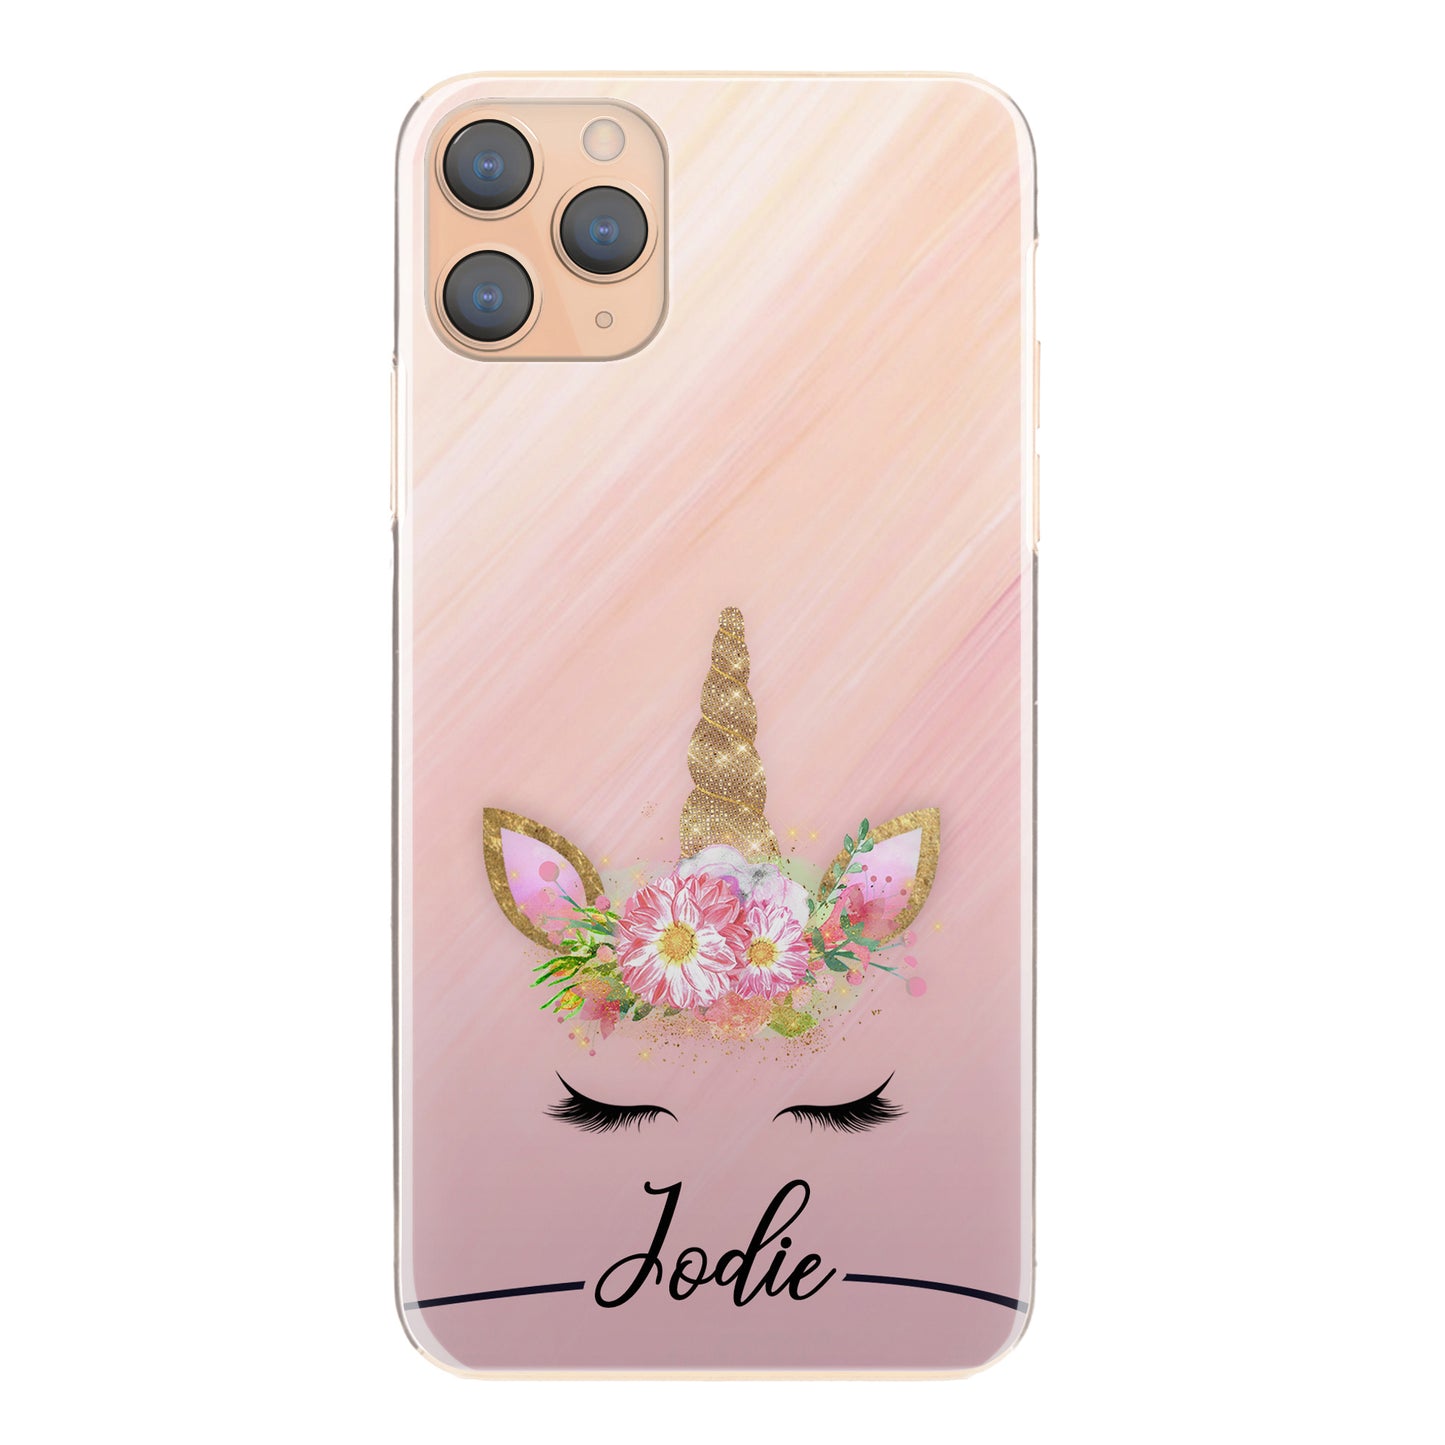 Personalised Samsung Galaxy Phone Hard Case with Gold Floral Unicorn and Text on Pink